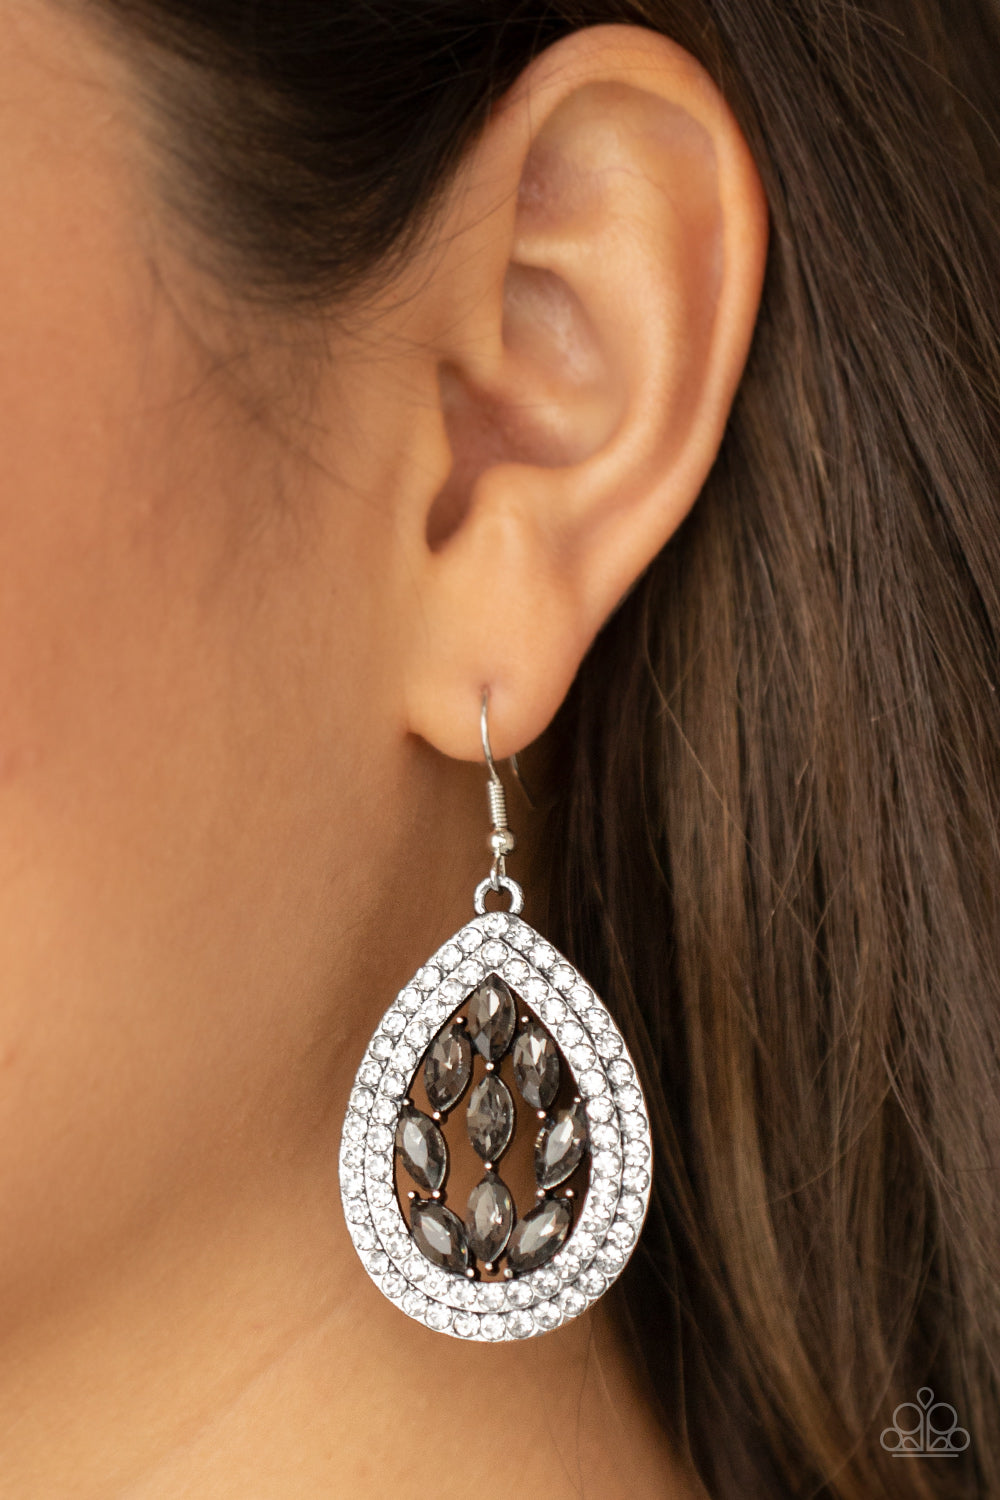 Encased Elegance Silver Earring - Paparazzi Accessories  Smoky marquise cut rhinestones collect inside two borders of glassy white rhinestones, coalescing into a sparkly teardrop. Earring attaches to a standard fishhook fitting.  All Paparazzi Accessories are lead free and nickel free!  Sold as one pair of earrings.